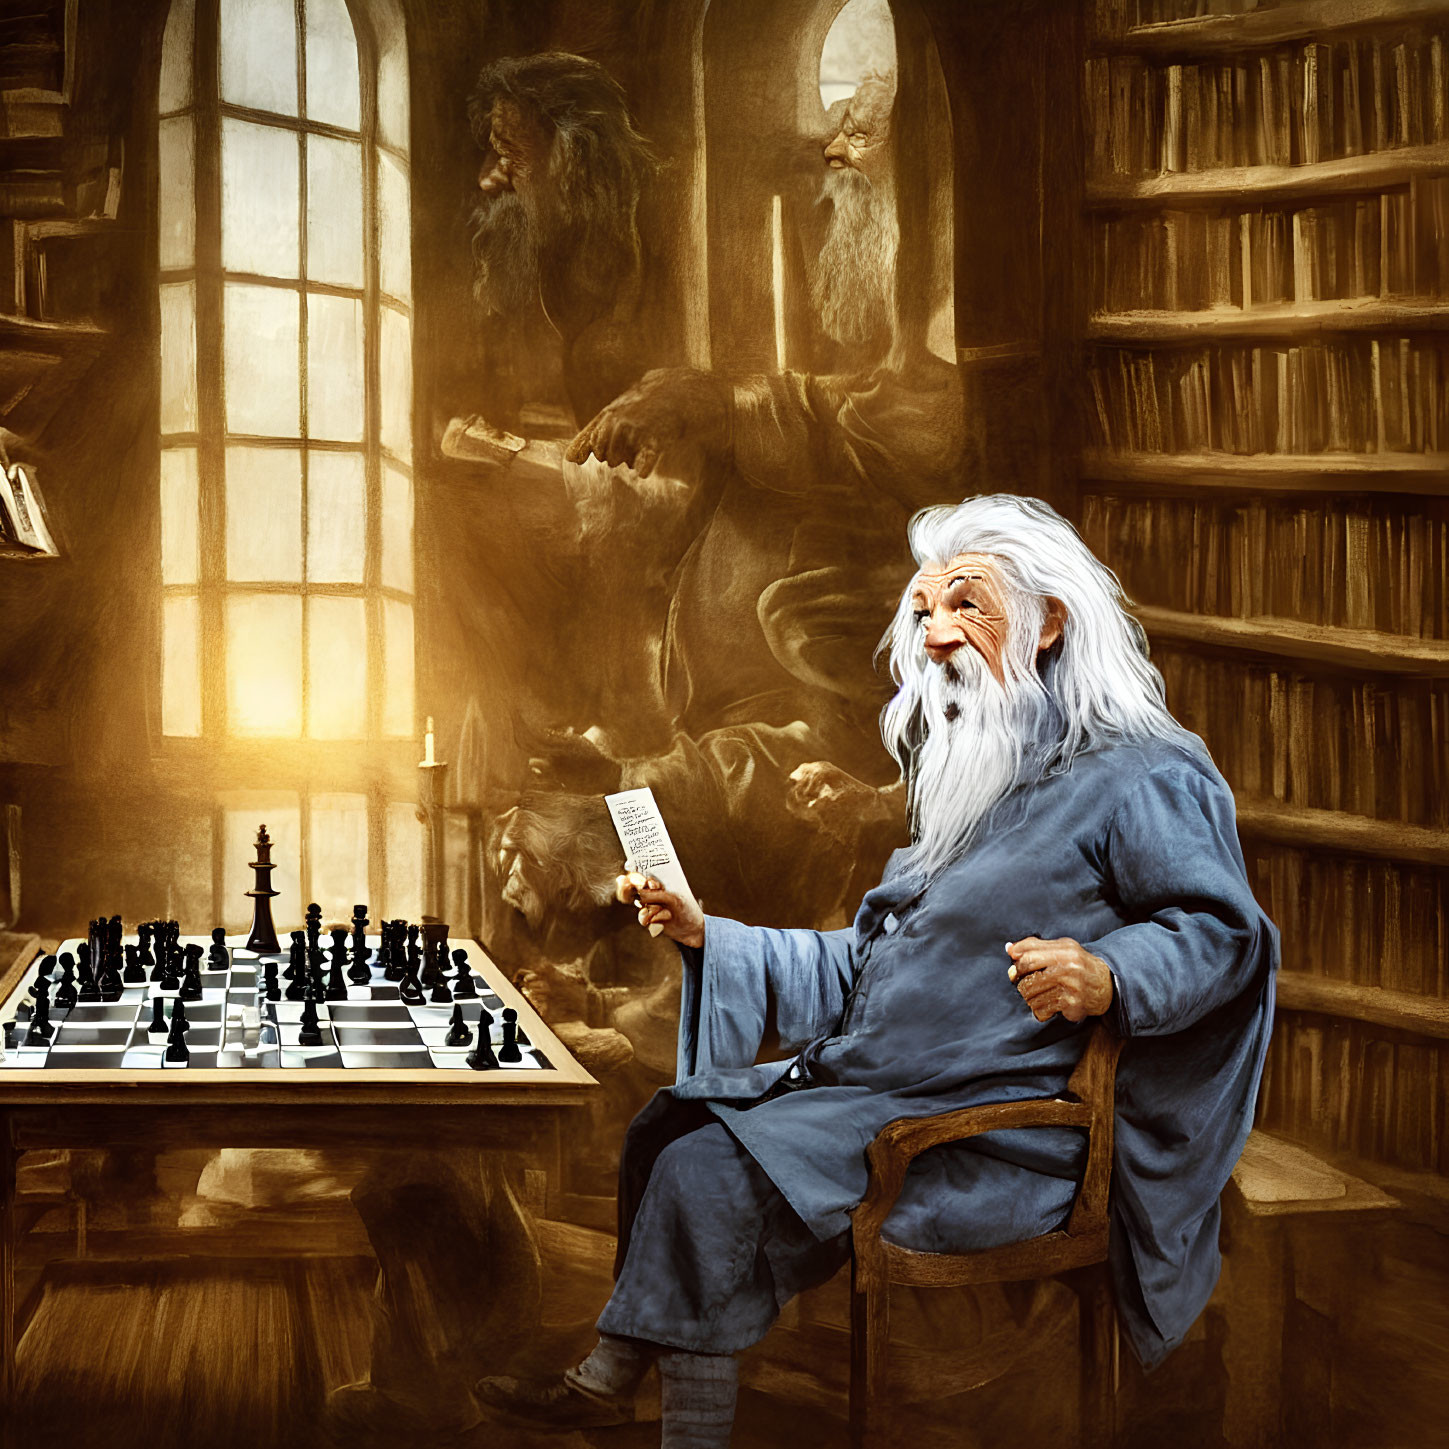 Elderly wizard reading scroll in book-filled room with chess set